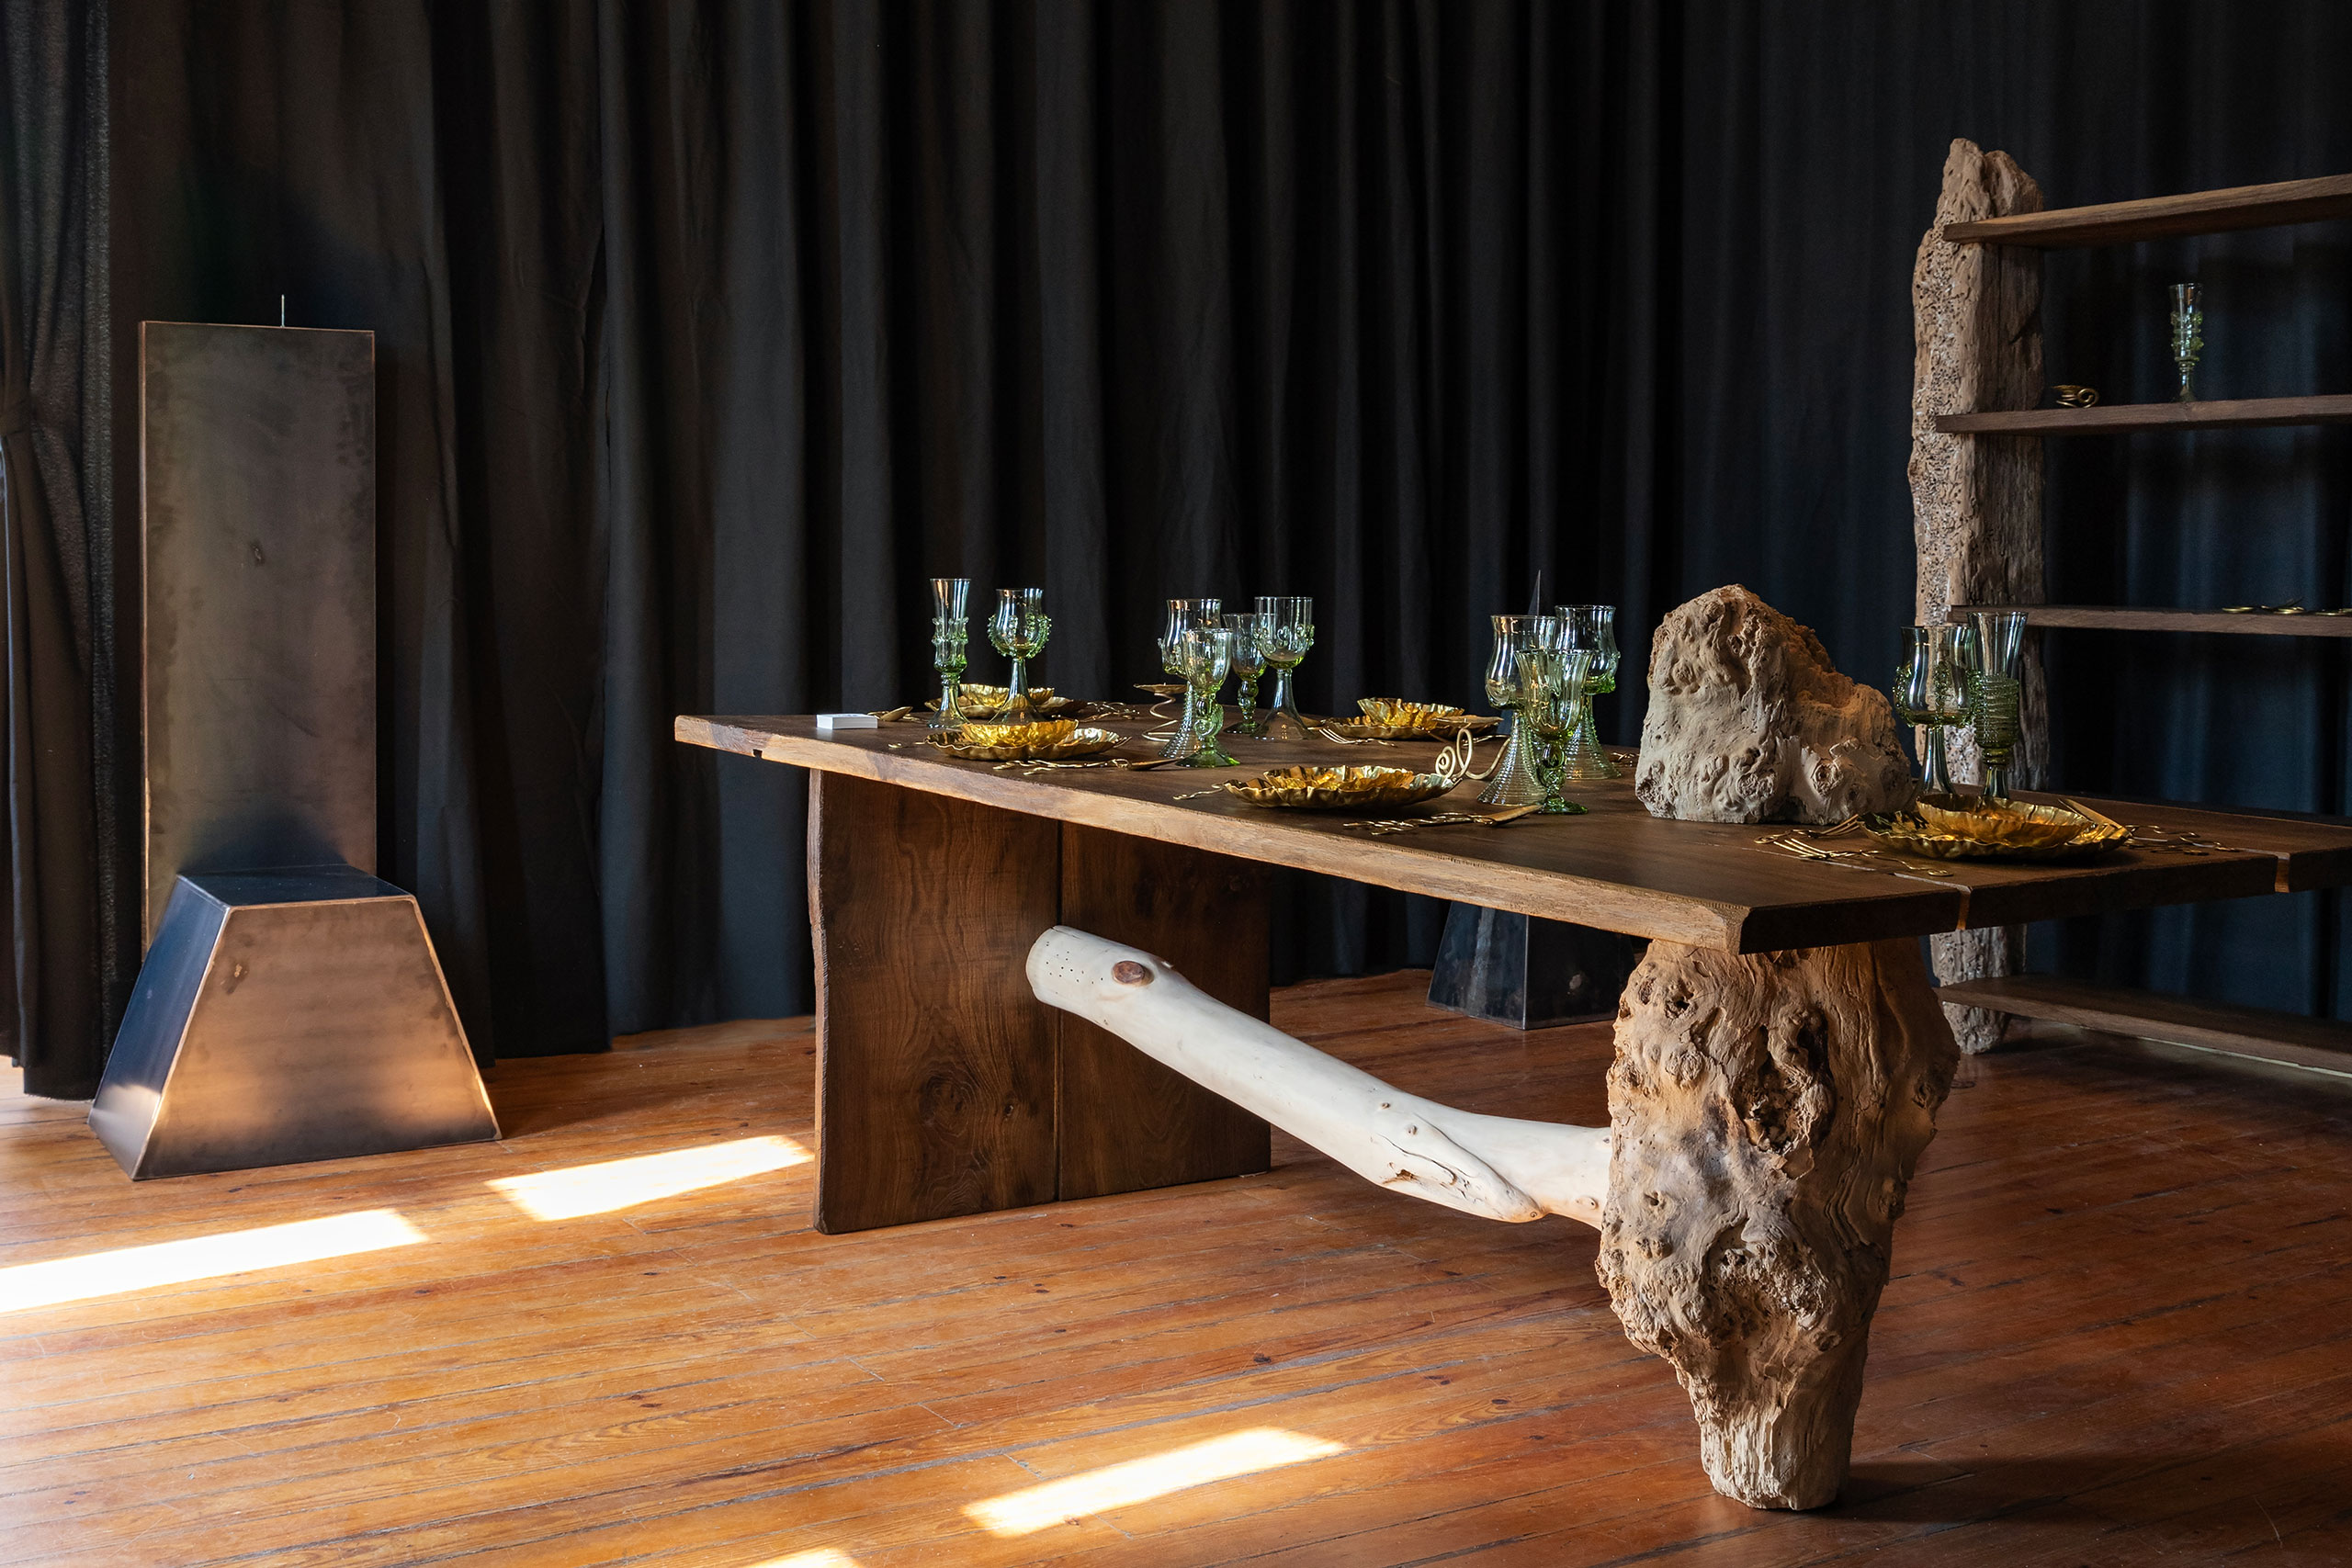 Installation view. Lisbon by Design, Palacete Gomes Freire, Lisbon. May 22- 26, 2024. Photography by Claudia Rocha.
Dining table from recycled wood by ApeWood (João Maria Bernardino); Metal plates and cutlery by Sebastião Lobo; Glassware by Lucie Claudia.